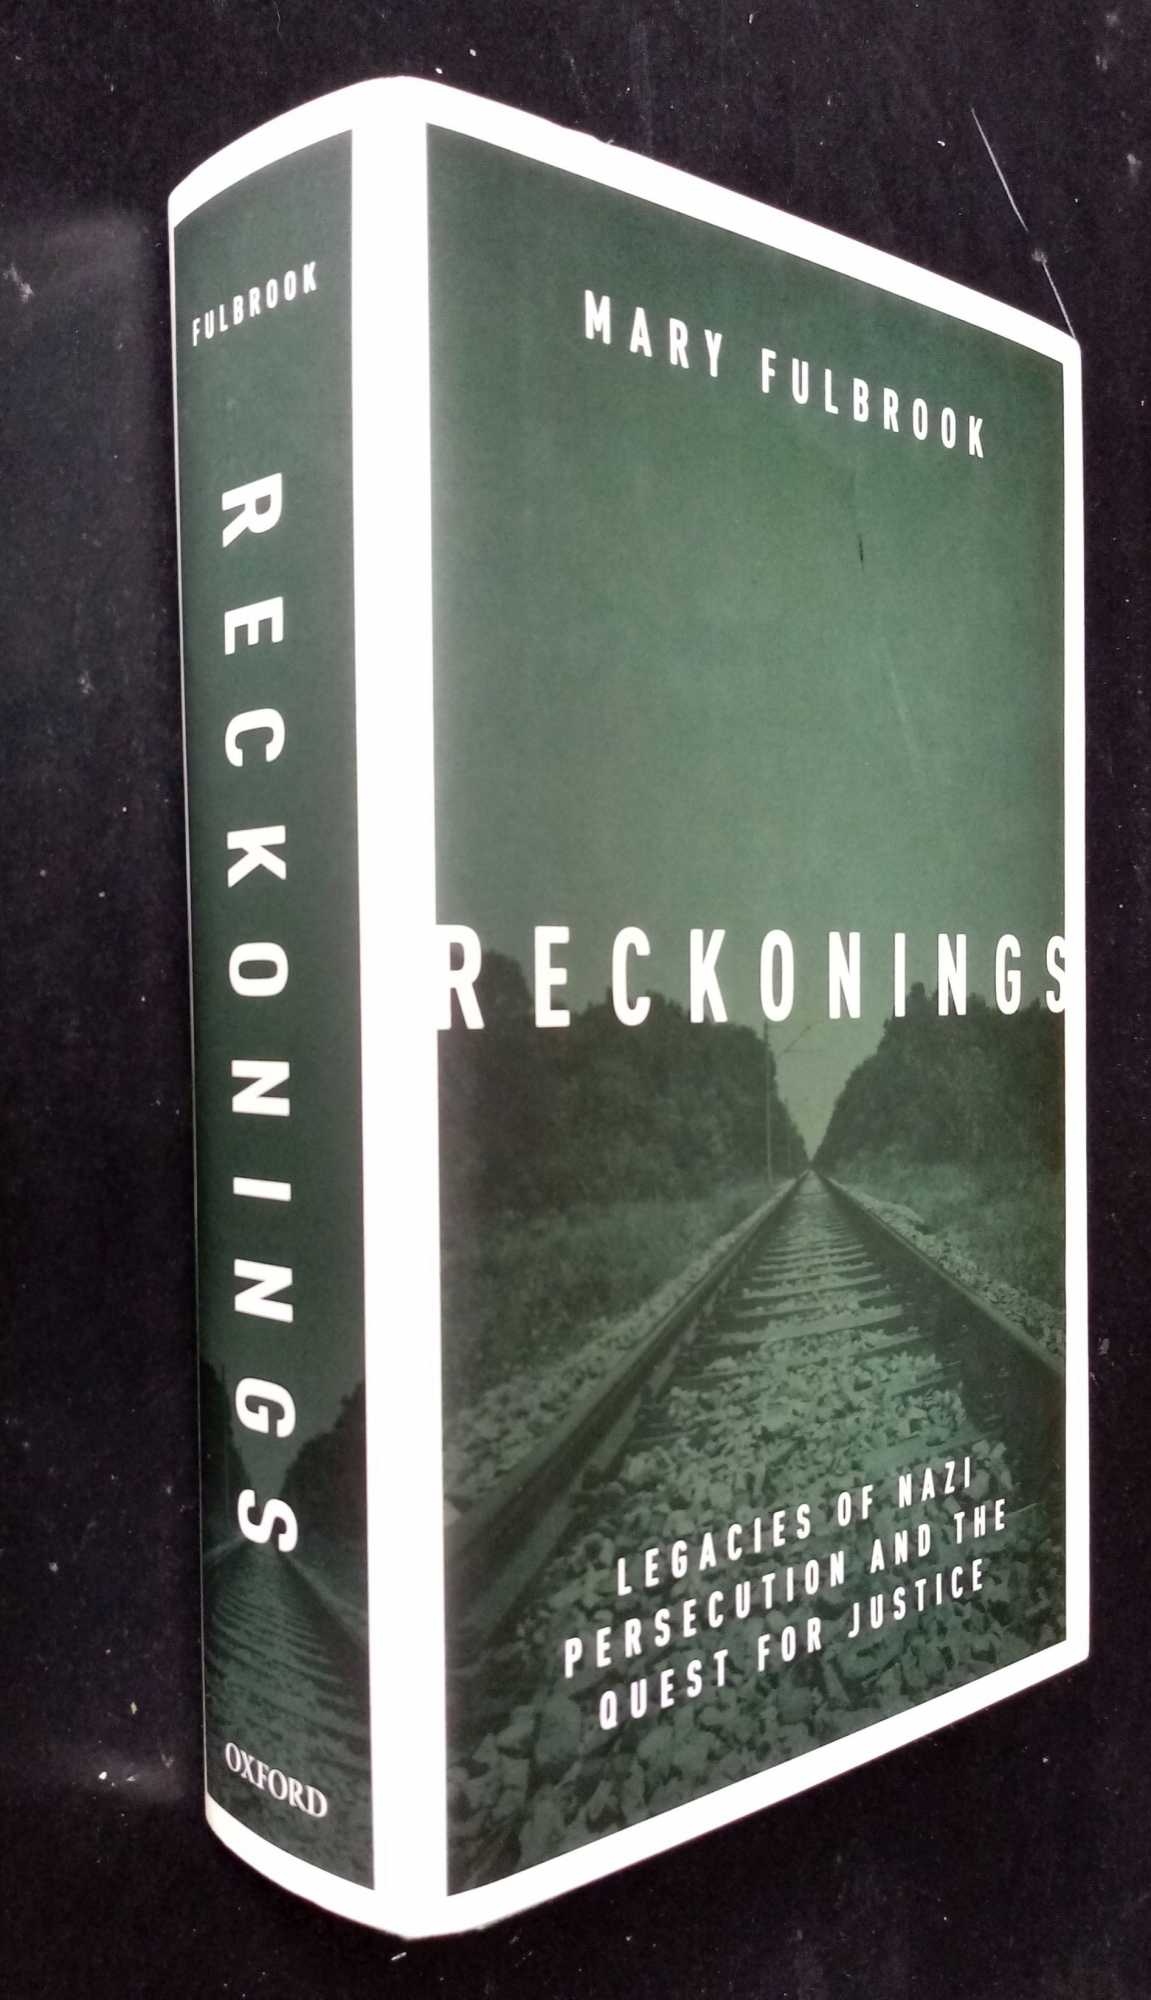 Mary Fulbrook - Reckonings: Legacies of Nazi Persecution and the Quest for Justice